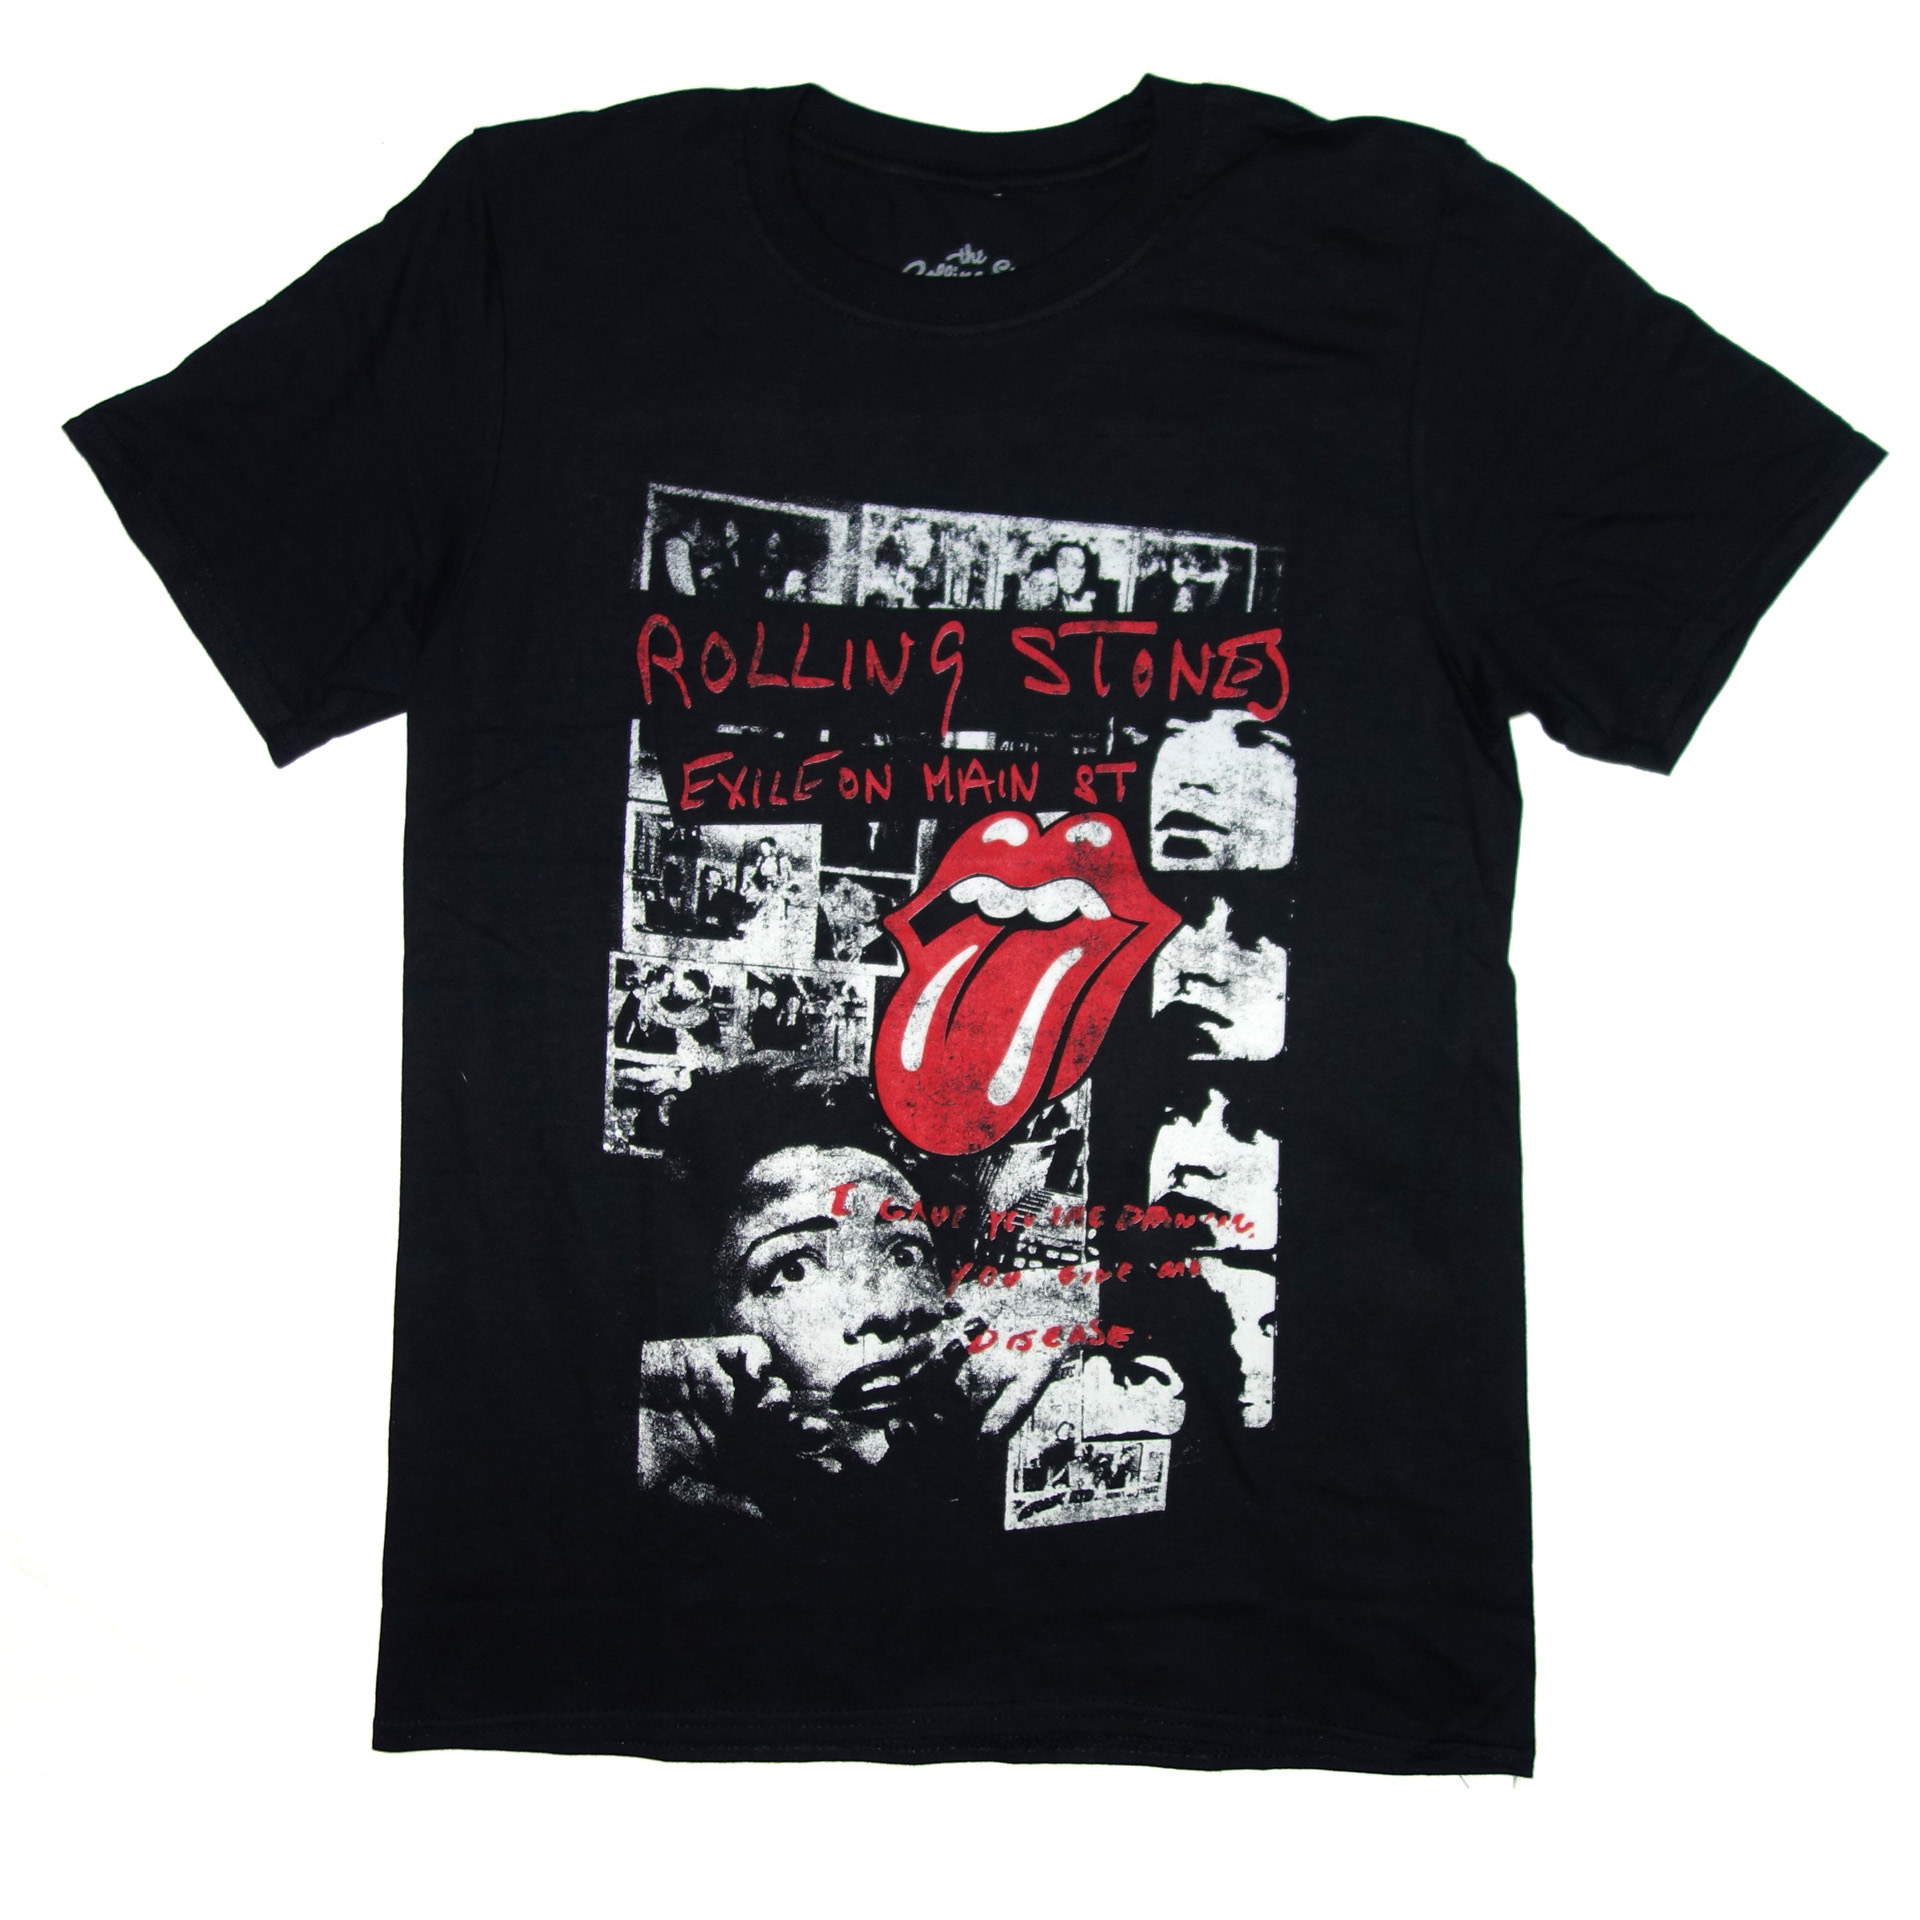  T-Shirt The Rolling Stones Collage